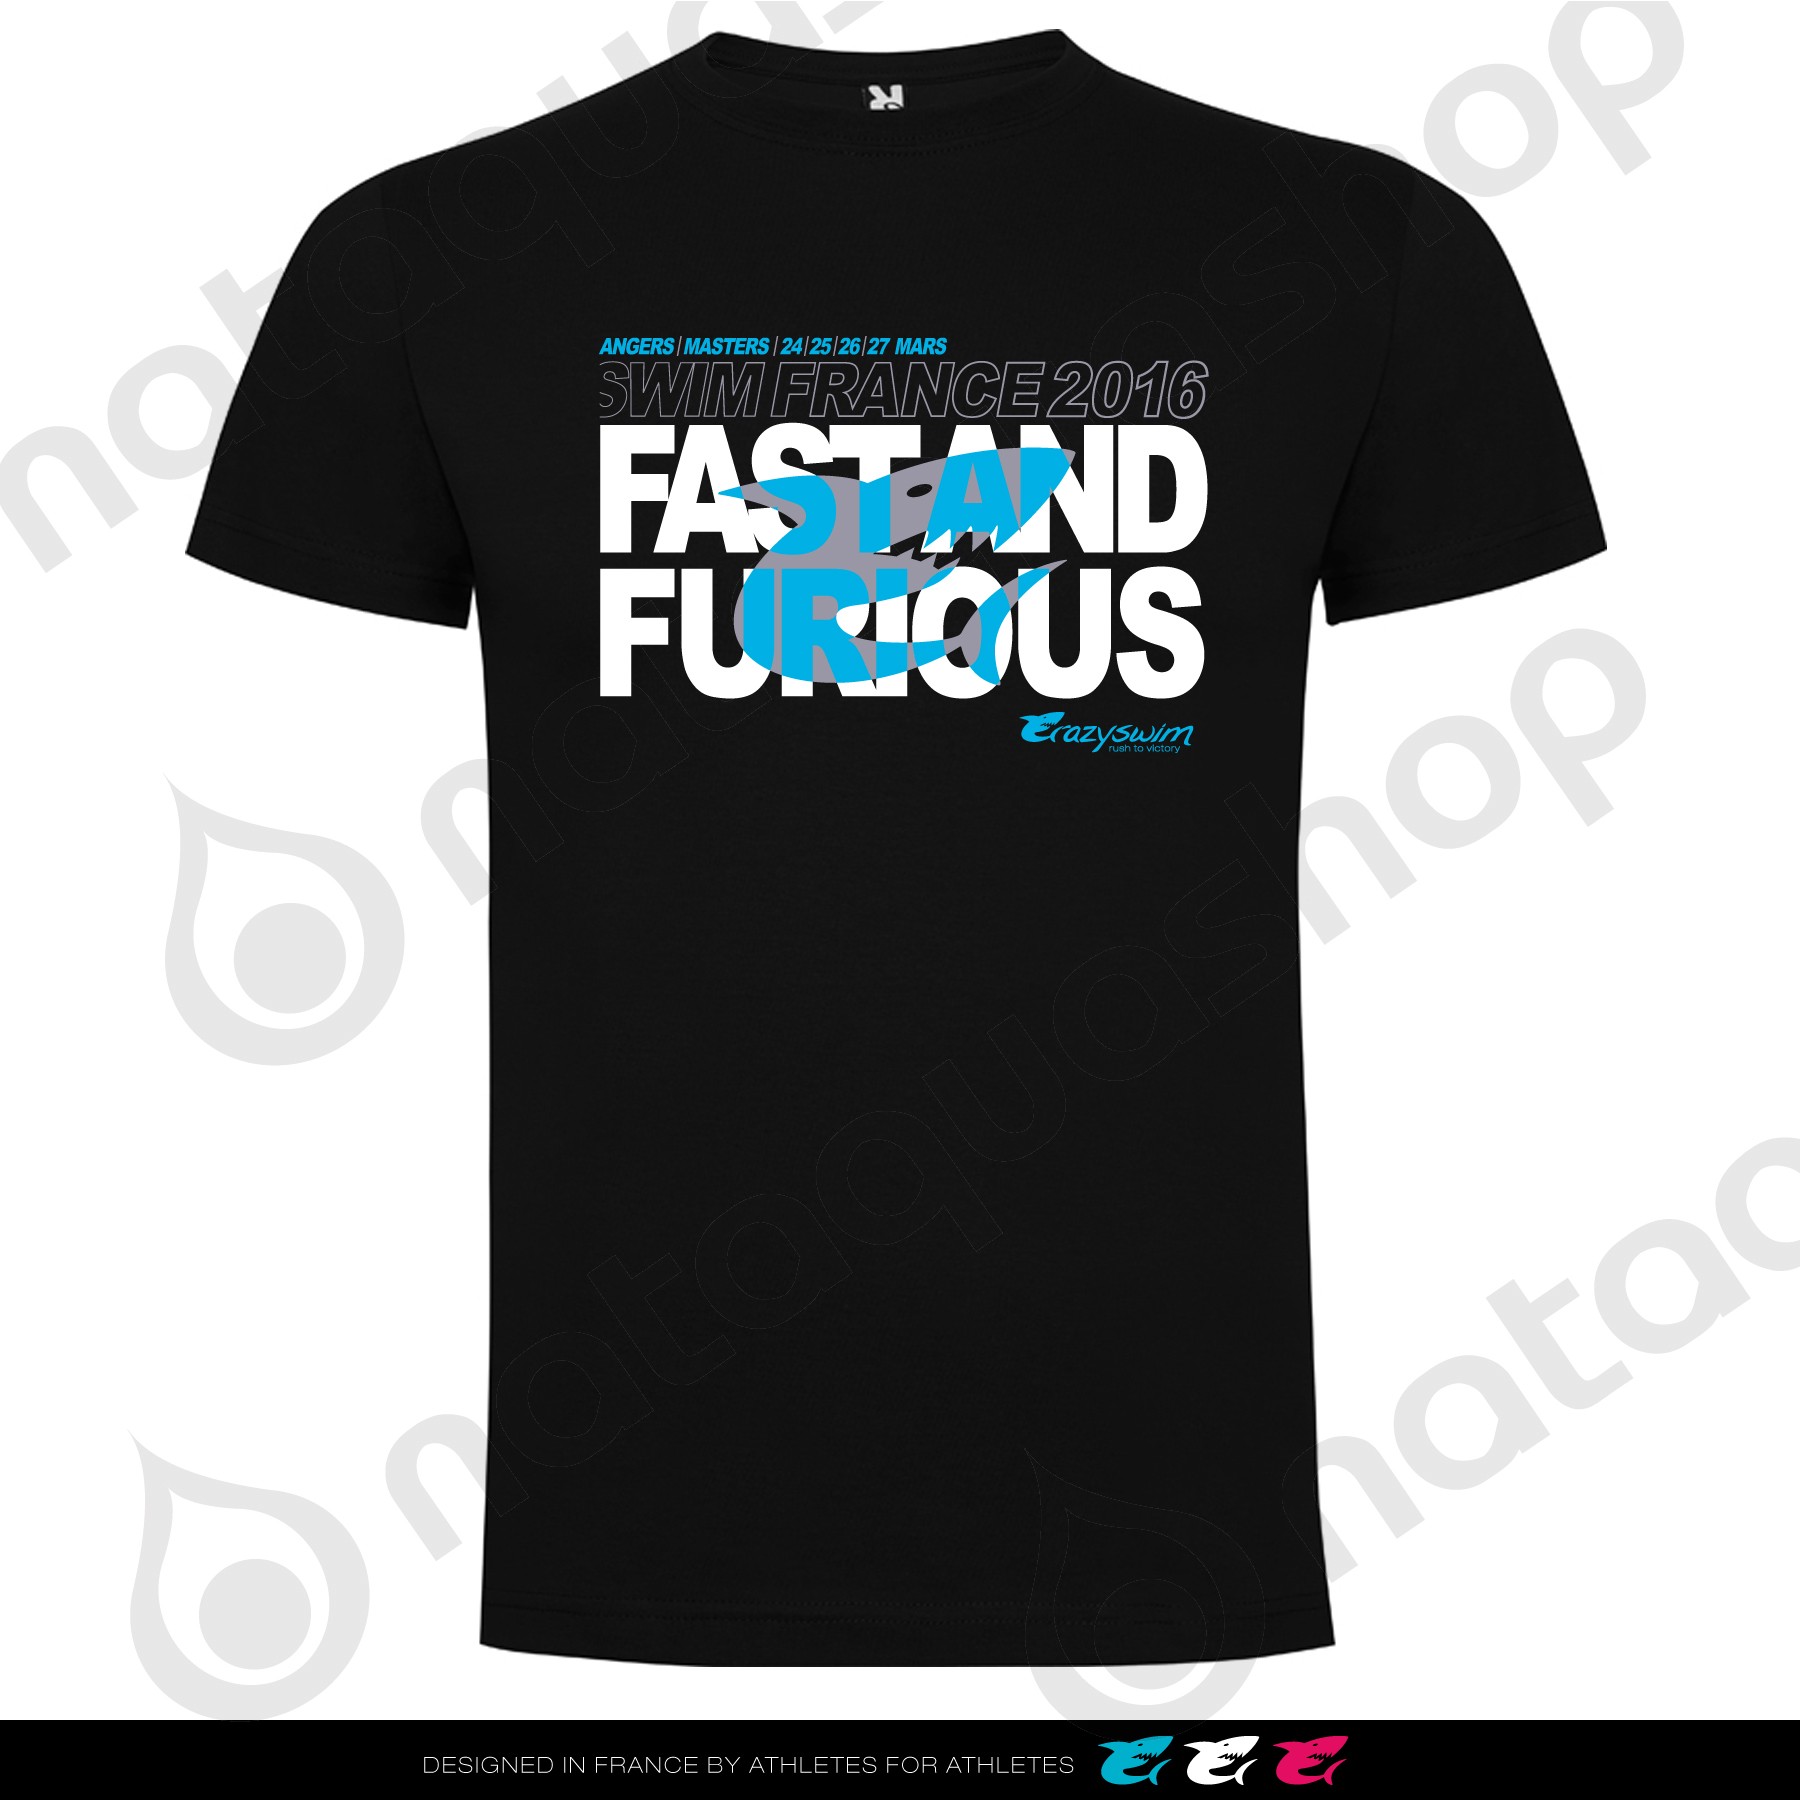 T-SHIRT FAST & FURIOUS - MASTERS 